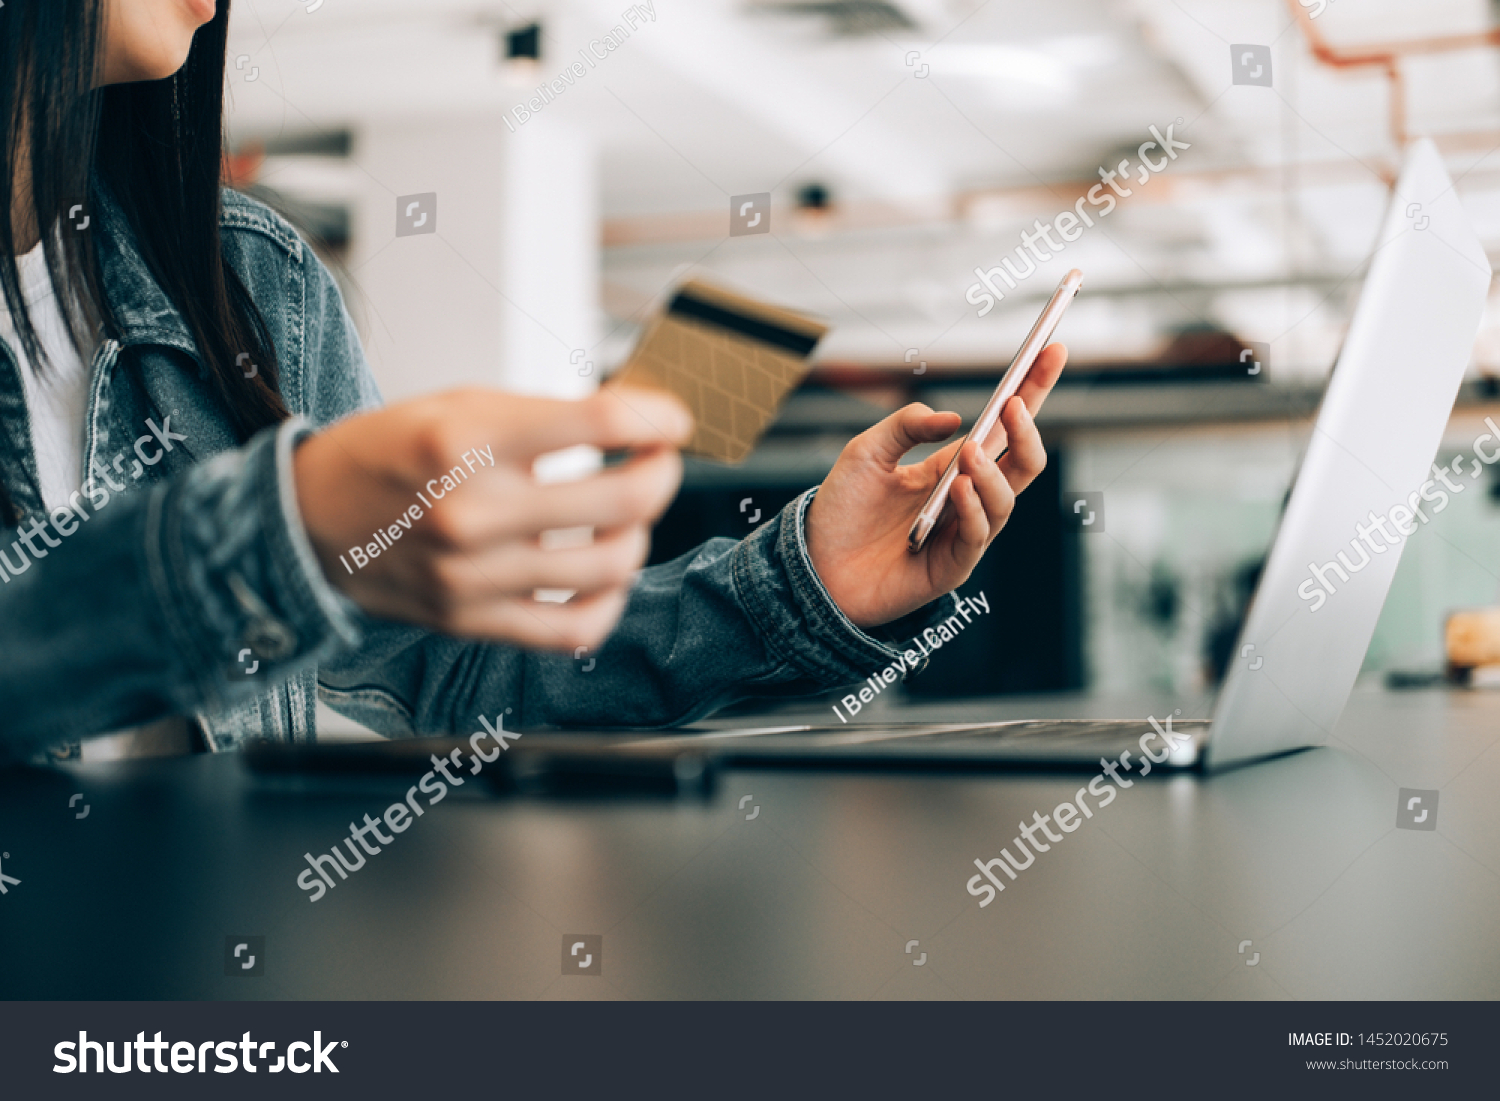 beautiful woman holding credit card and using laptop and smartphone shopping website online, shopping concept
 #1452020675